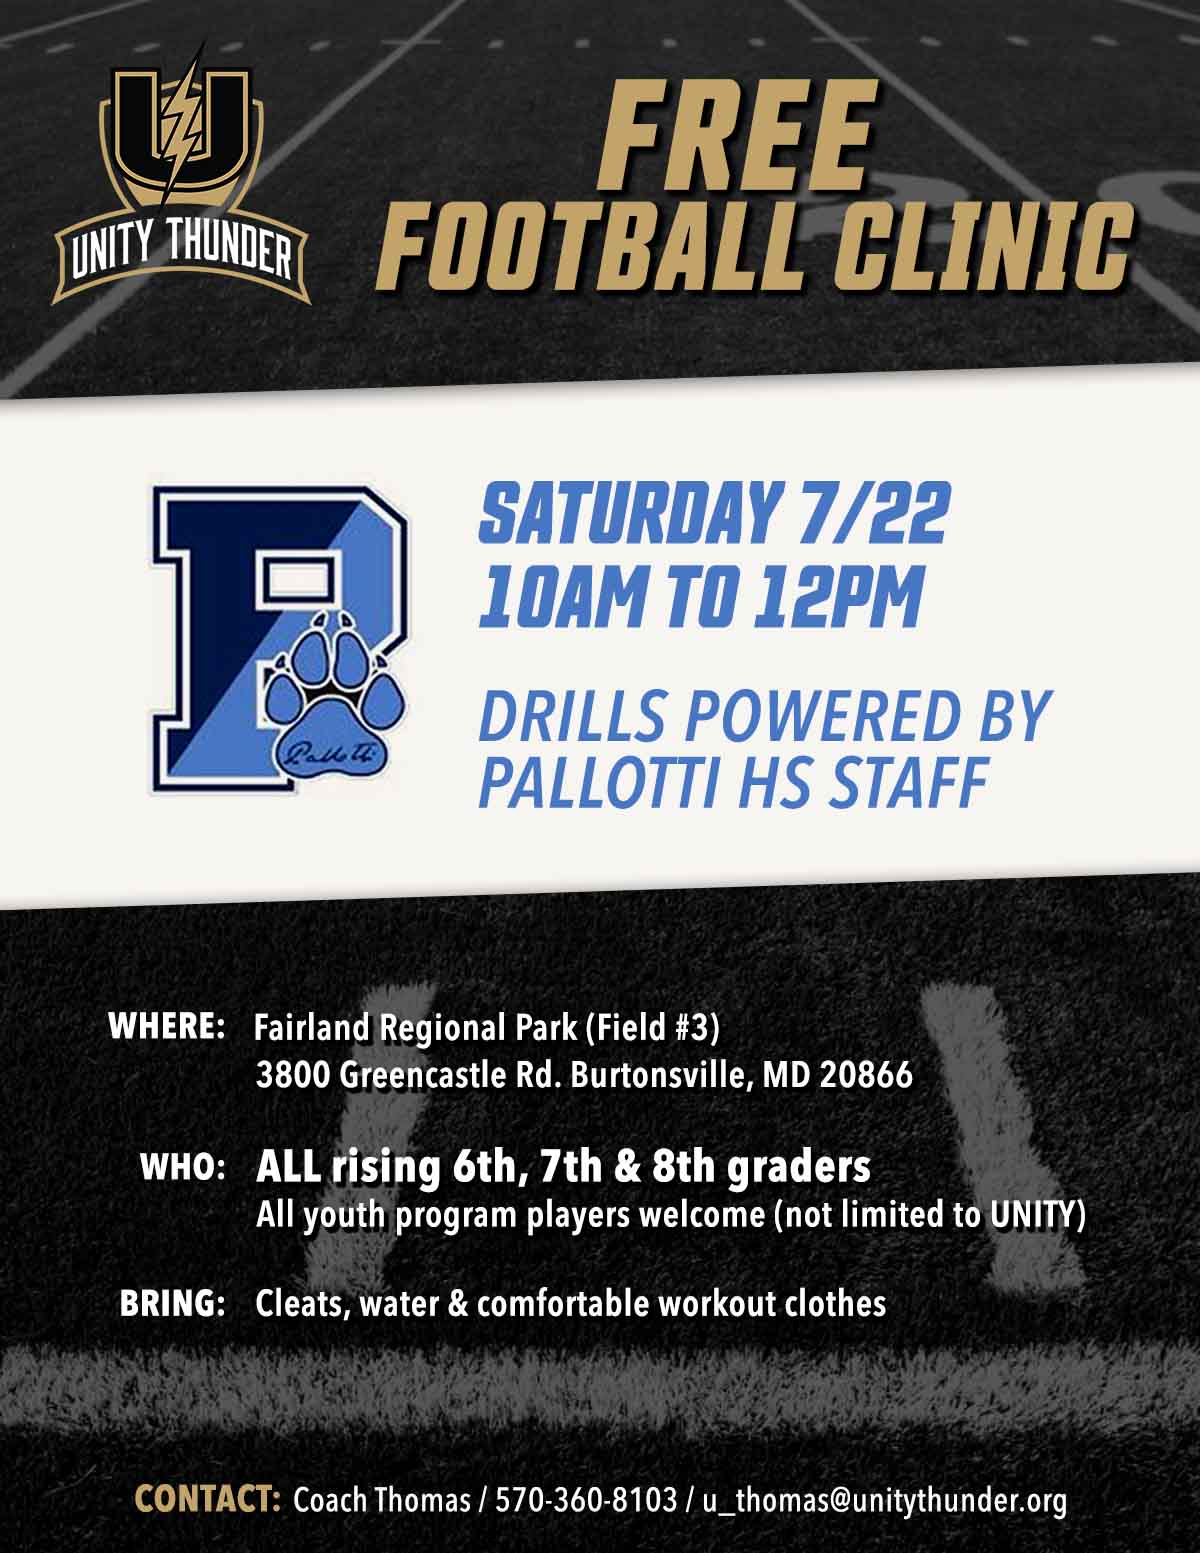 Free Football Clinic with Pallotti HS